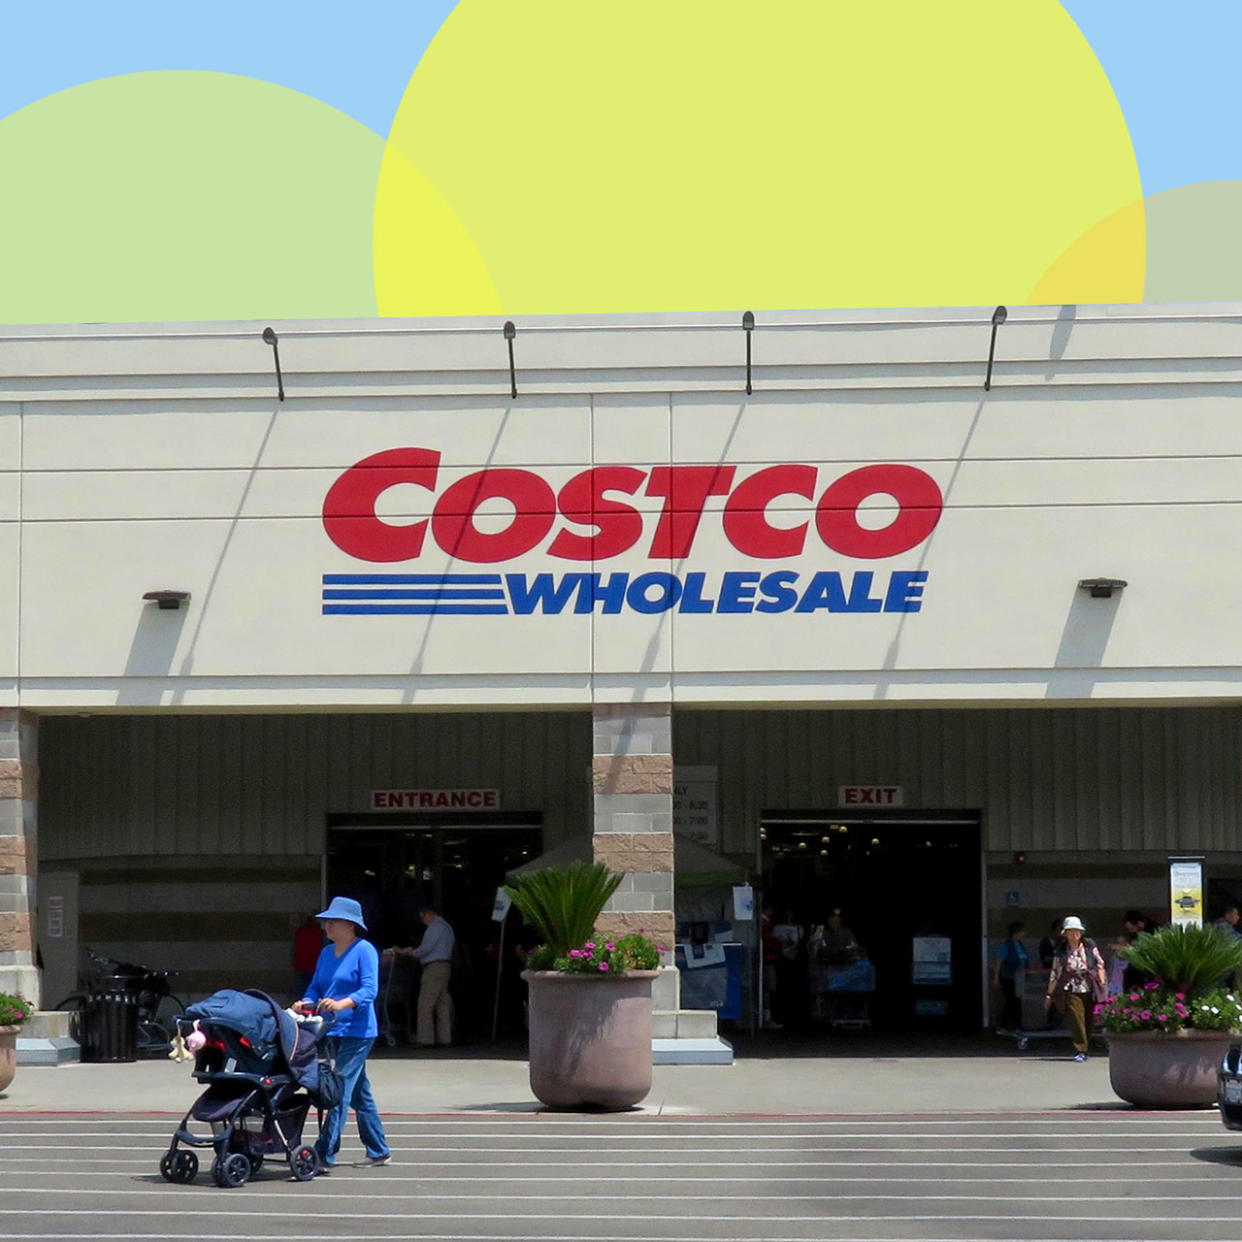 costco store with yellow circles in background